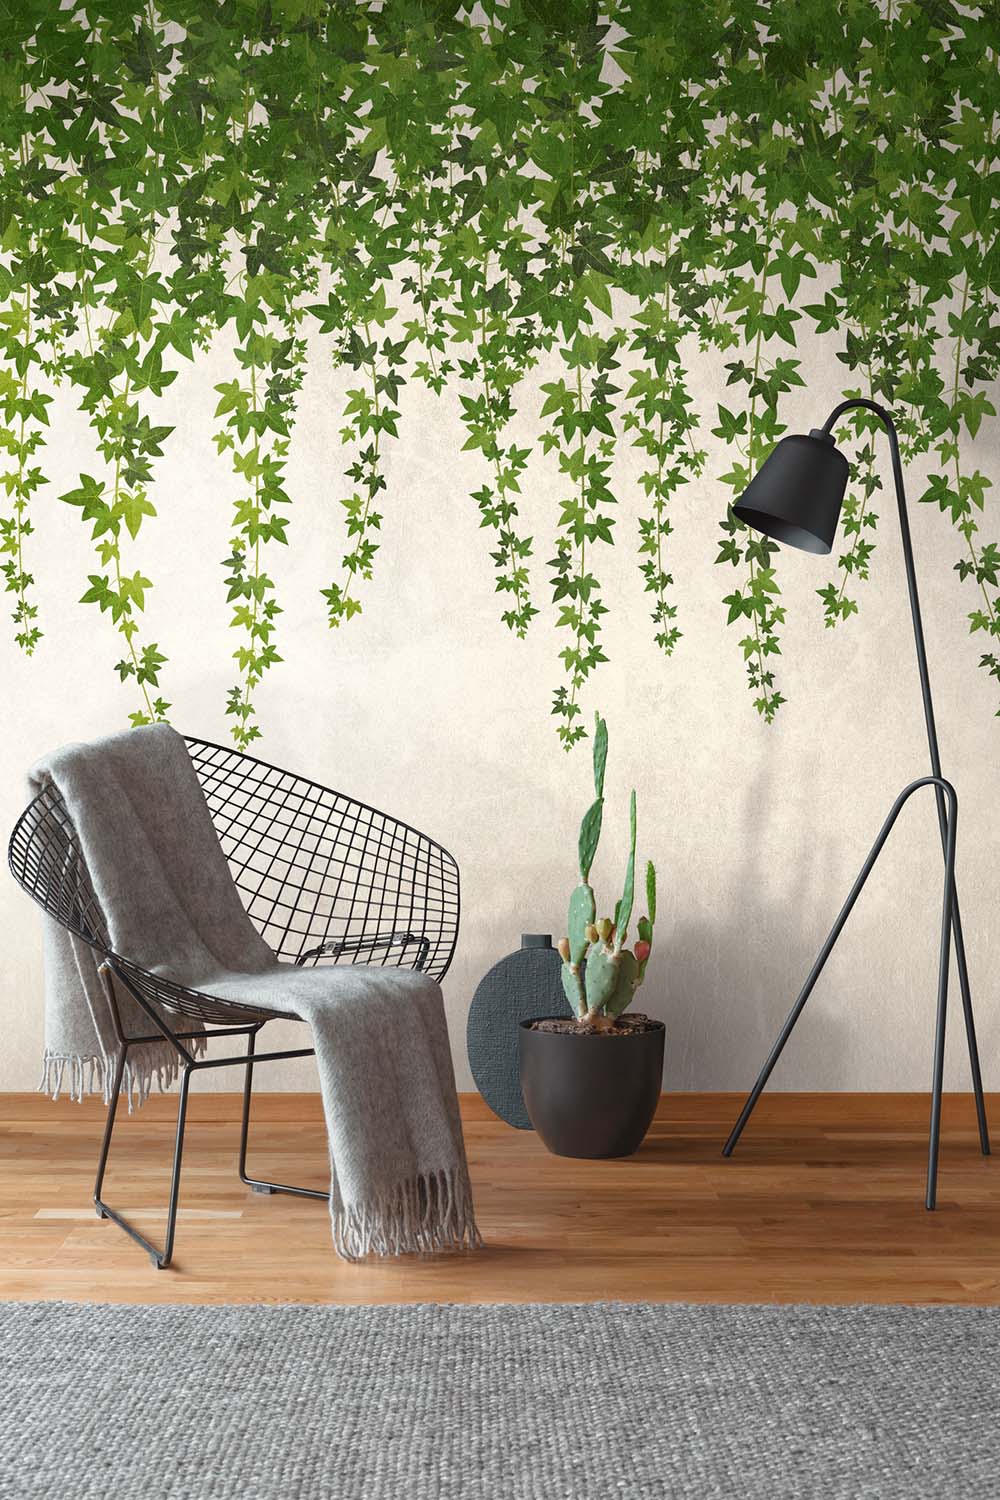 The Wall - Hanging Vine smart walls AS Creation    